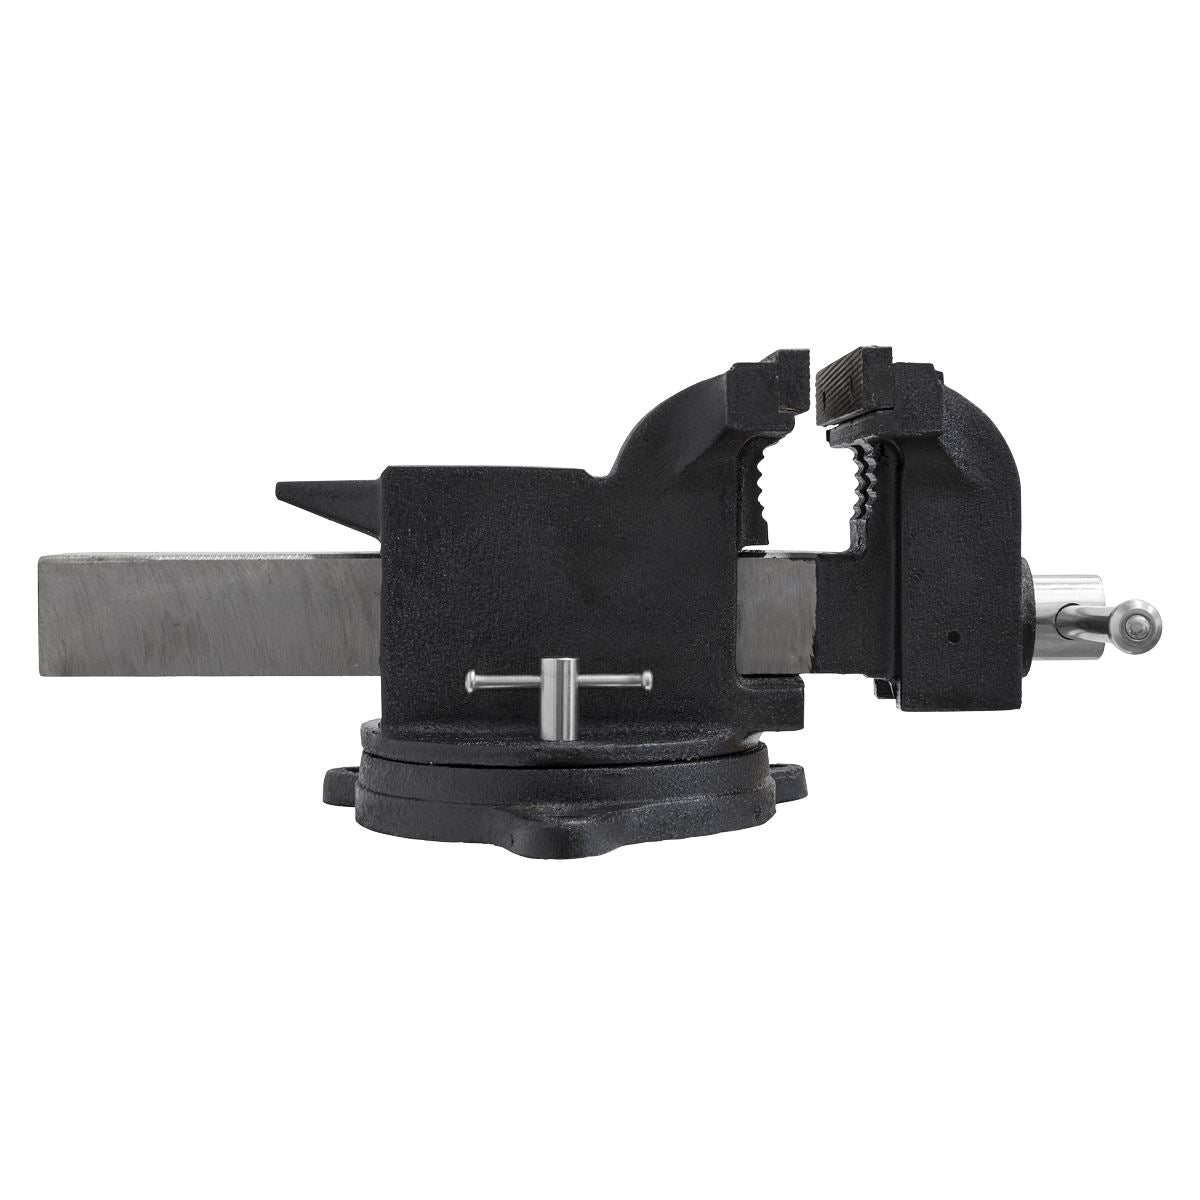 Sealey Industrial Vice 150mm SG Iron